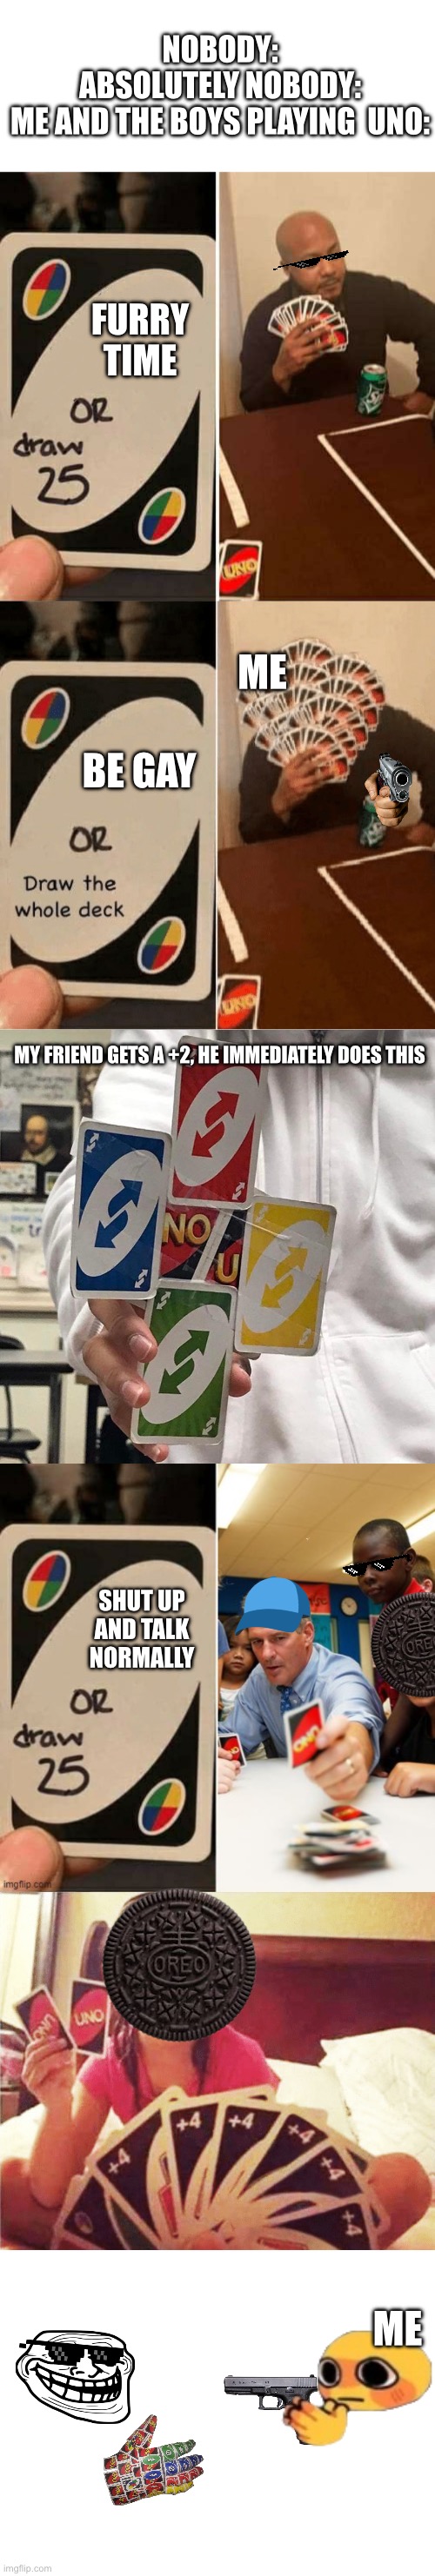 Me and the boys playing the f cking UNO | NOBODY:
ABSOLUTELY NOBODY:
ME AND THE BOYS PLAYING  UNO:; FURRY TIME; ME; BE GAY; MY FRIEND GETS A +2, HE IMMEDIATELY DOES THIS; SHUT UP AND TALK NORMALLY; ME | image tagged in uno or draw 25,uno draw the whole deck,no u,uno,me and the boys,the boys | made w/ Imgflip meme maker